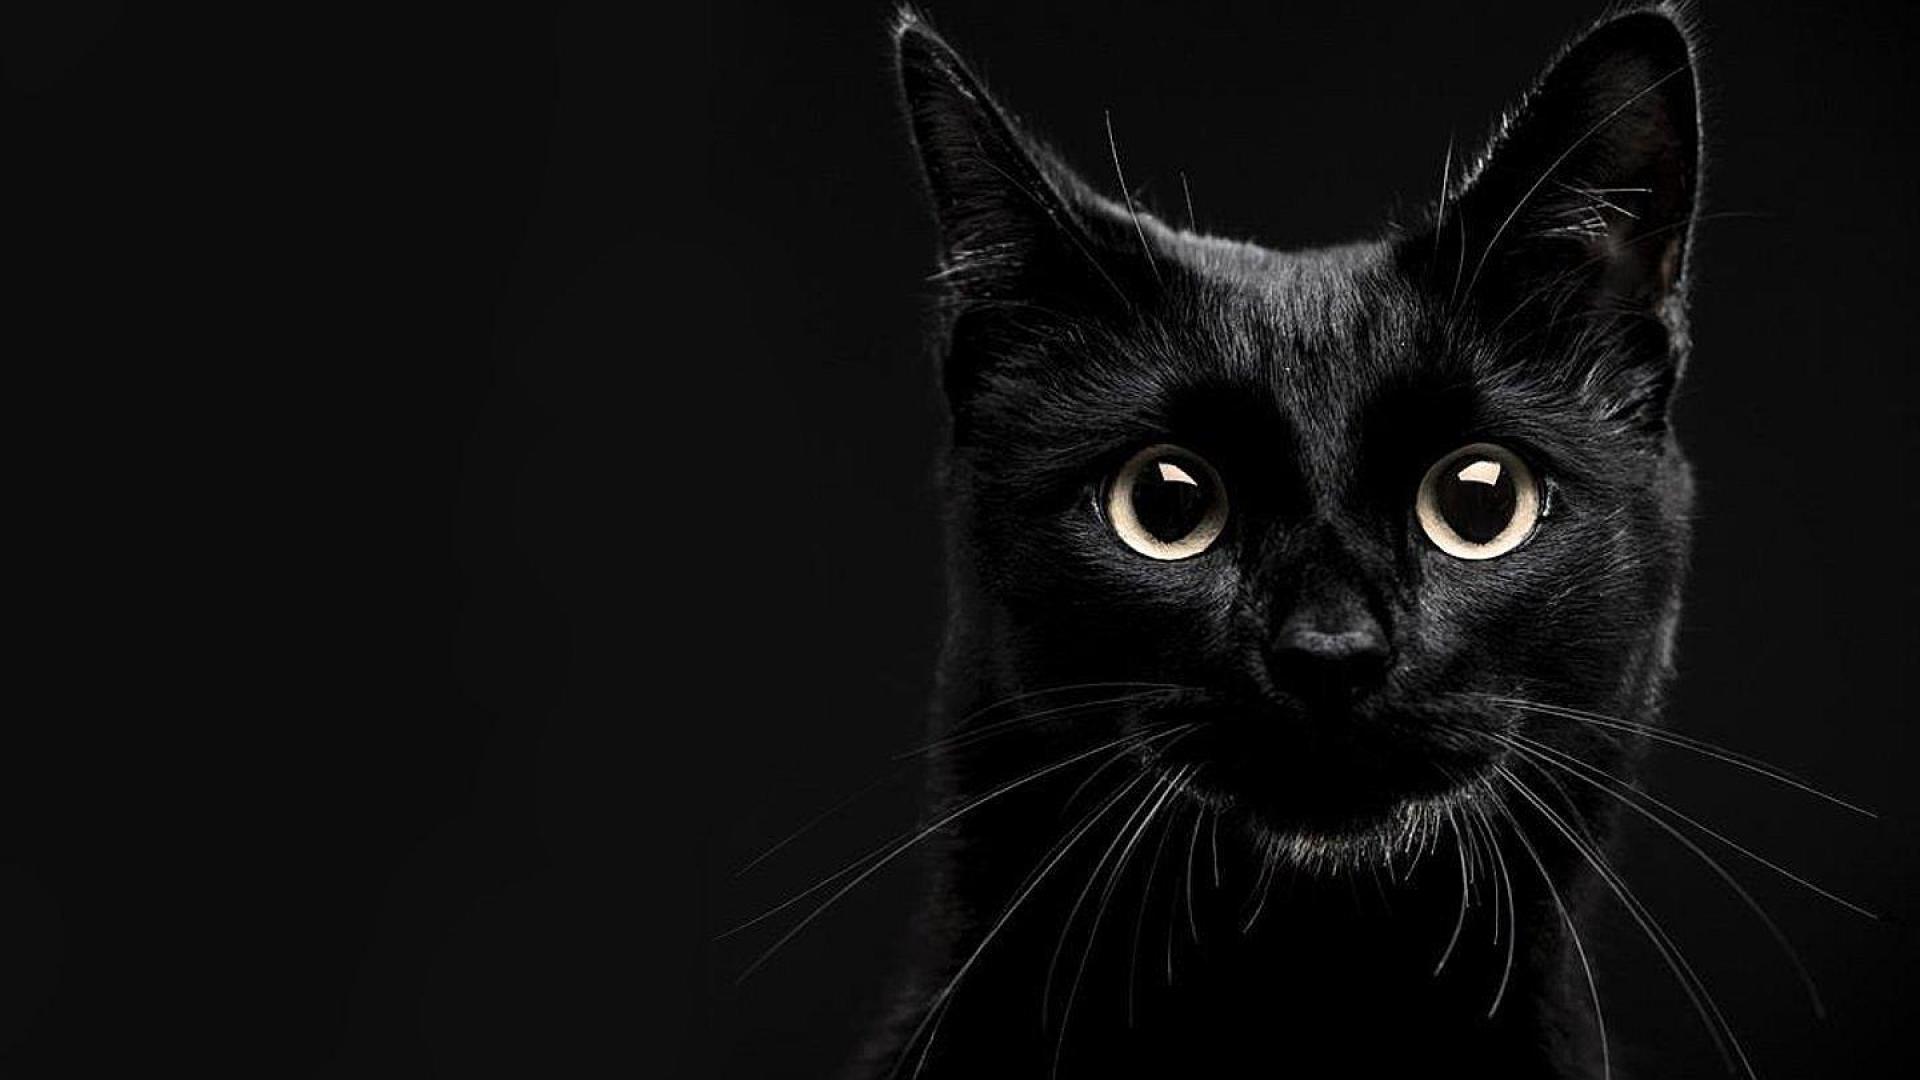 Black Cat Wallpaper   HD Wallpapers Backgrounds of Your Choice 1920x1080